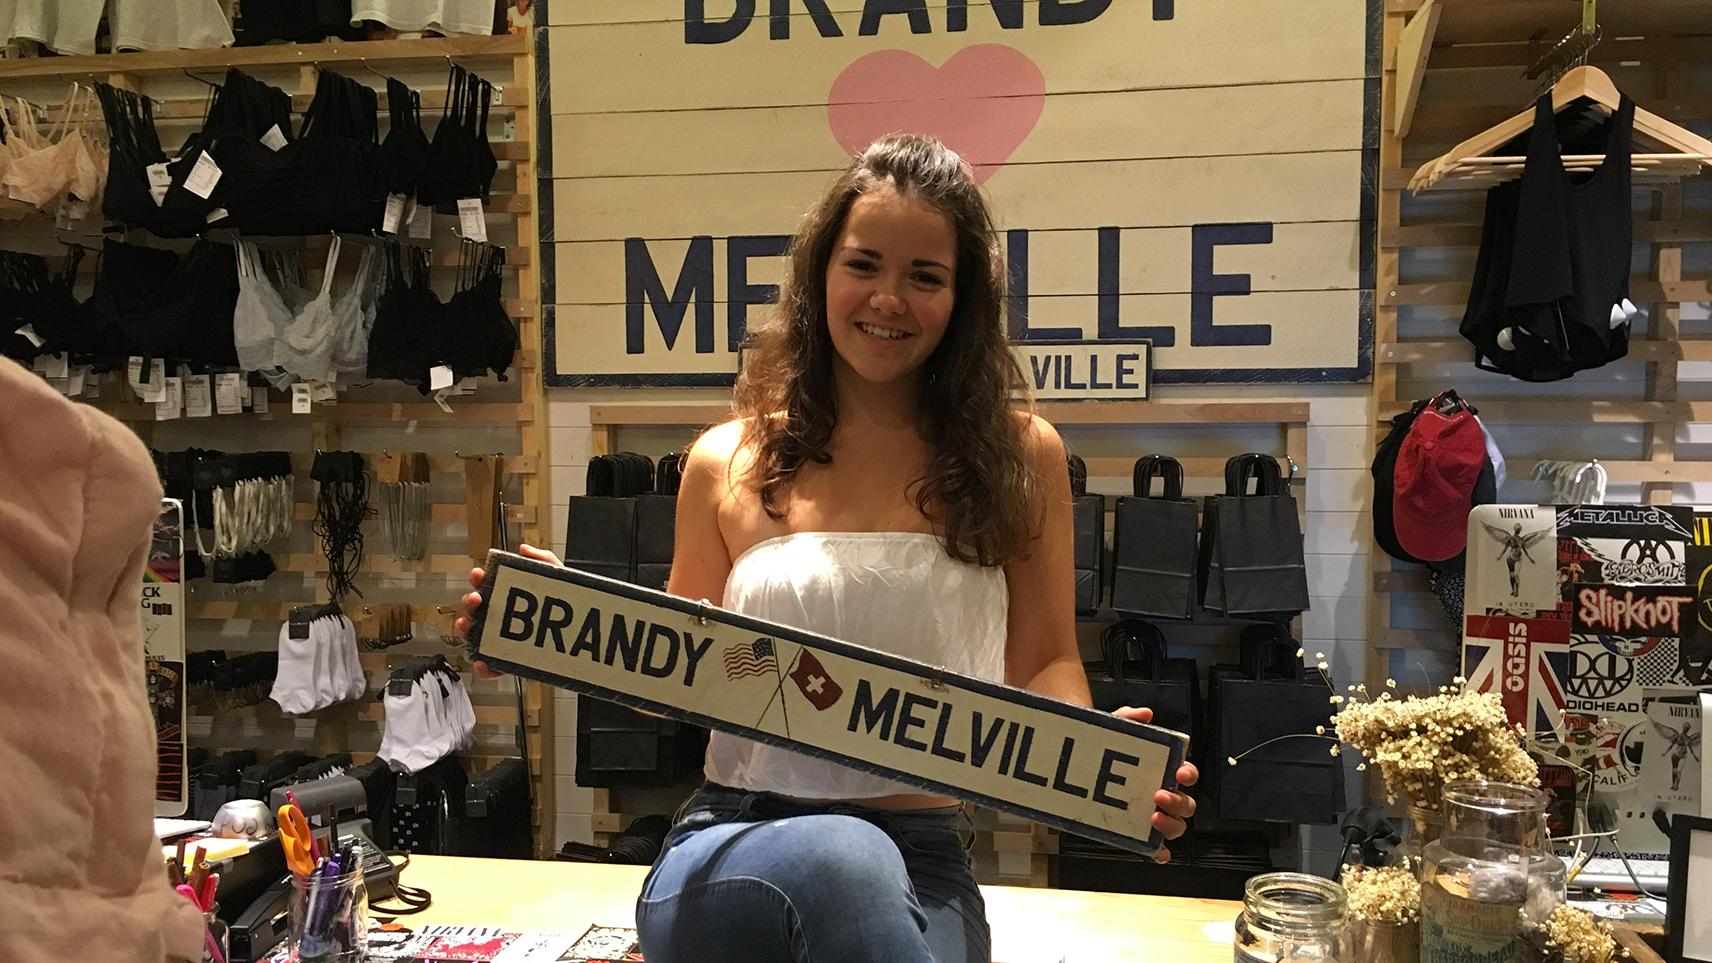 HBO Original Documentary BRANDY HELLVILLE & THE CULT OF FAST FASHION Debuts April 9